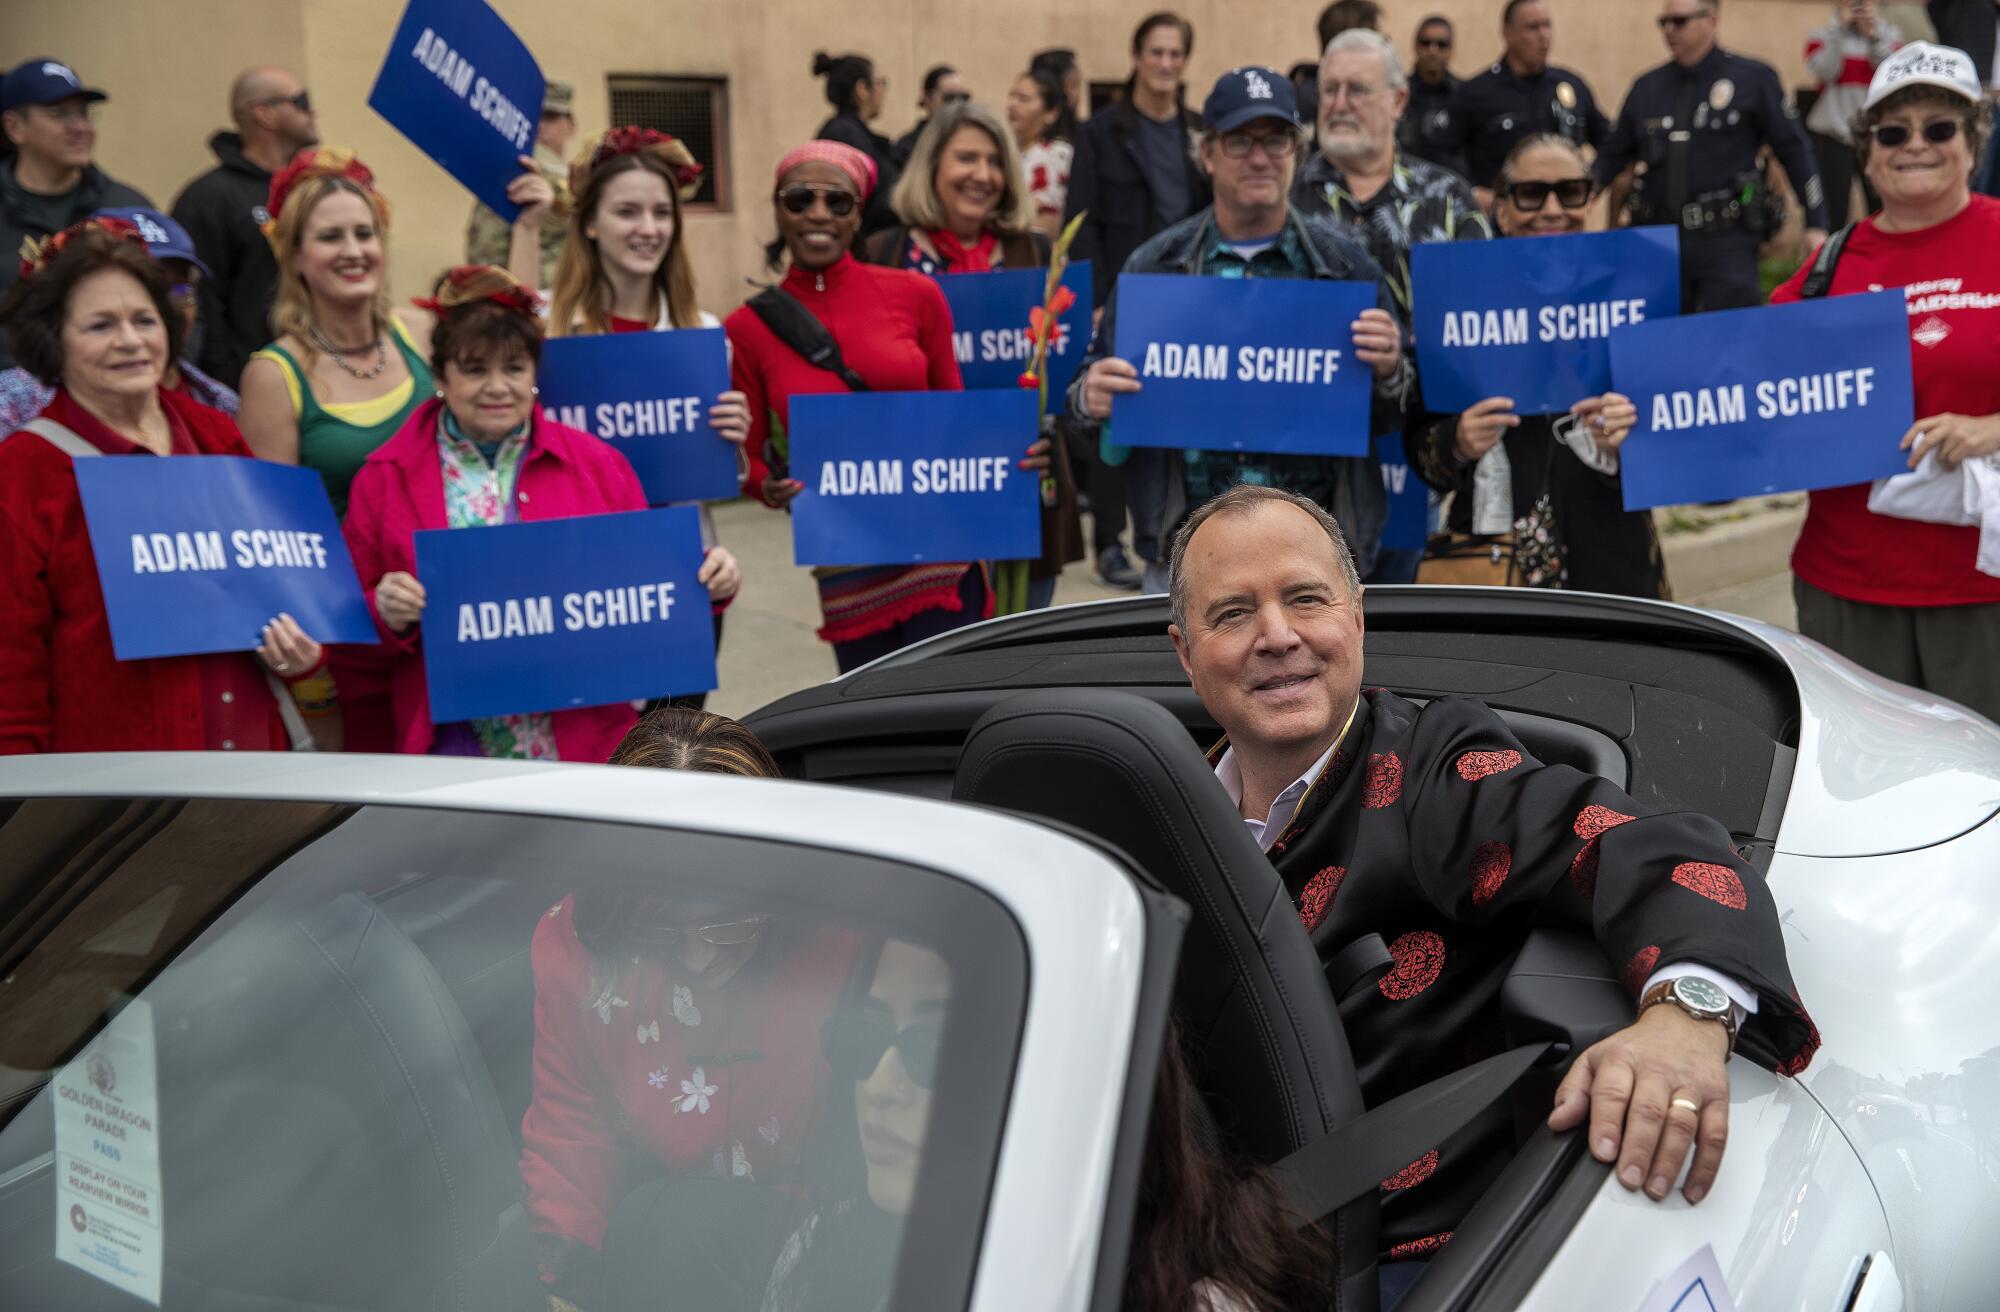  Adam Schiff rides in a vehicle with supporters along the route